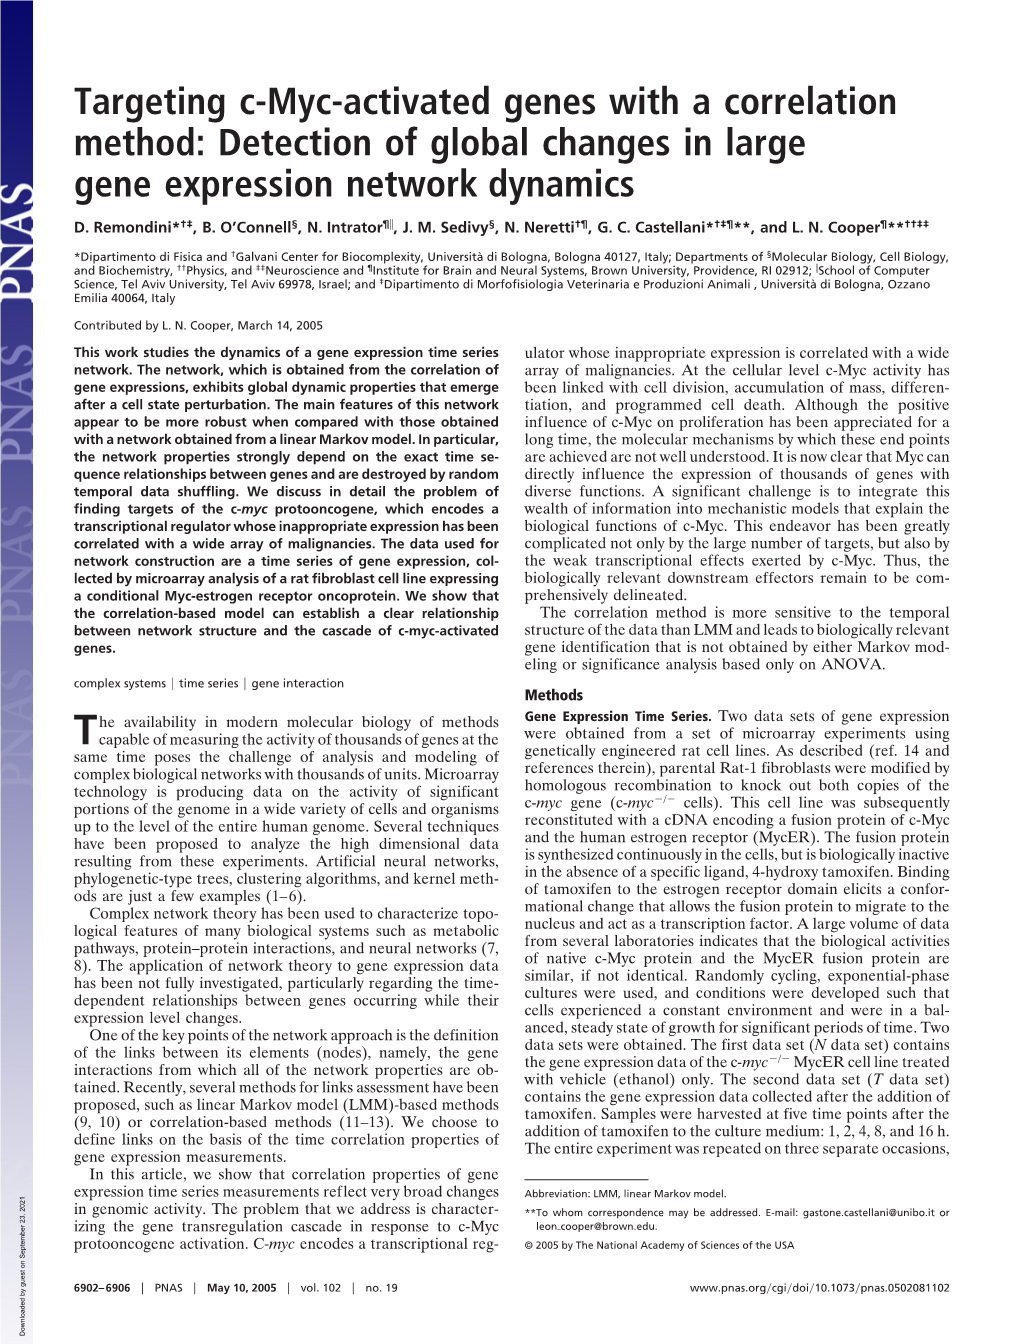 Targeting C-Myc-Activated Genes with a Correlation Method: Detection of Global Changes in Large Gene Expression Network Dynamics